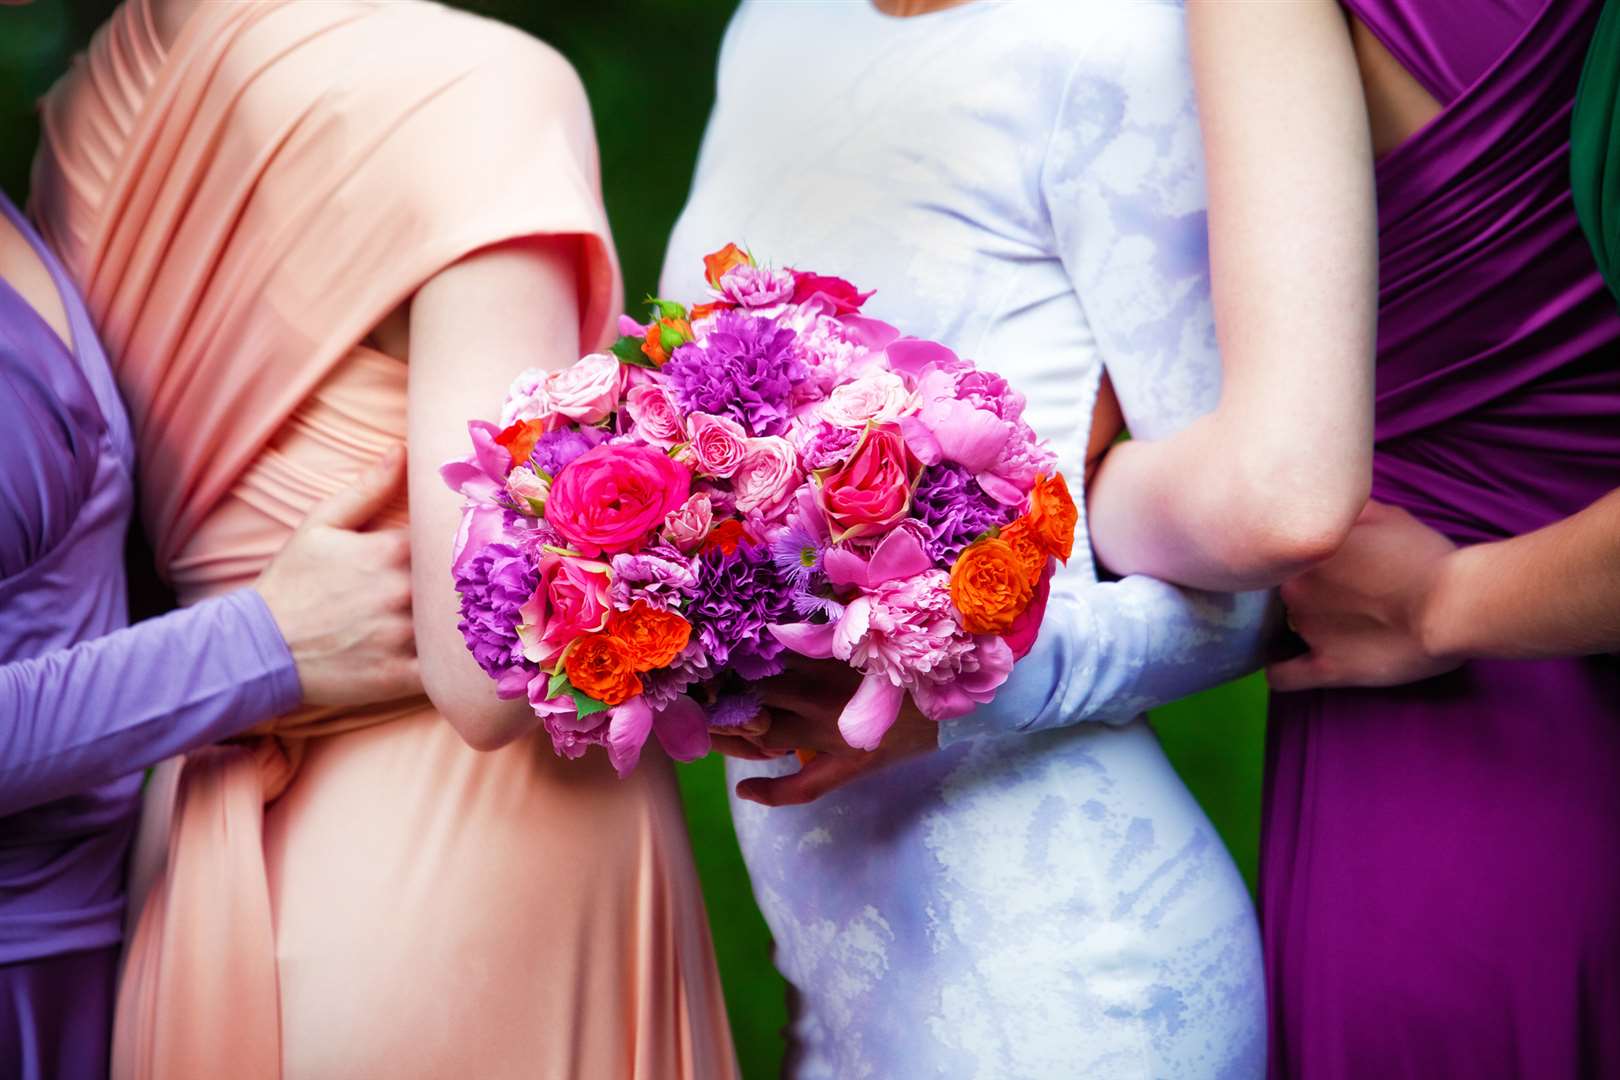 3. You might go for different complementary colours for your bridesmaids’ dresses. You can pull the look together with the bouquets – perhaps picking the same flower varieties in different colours.